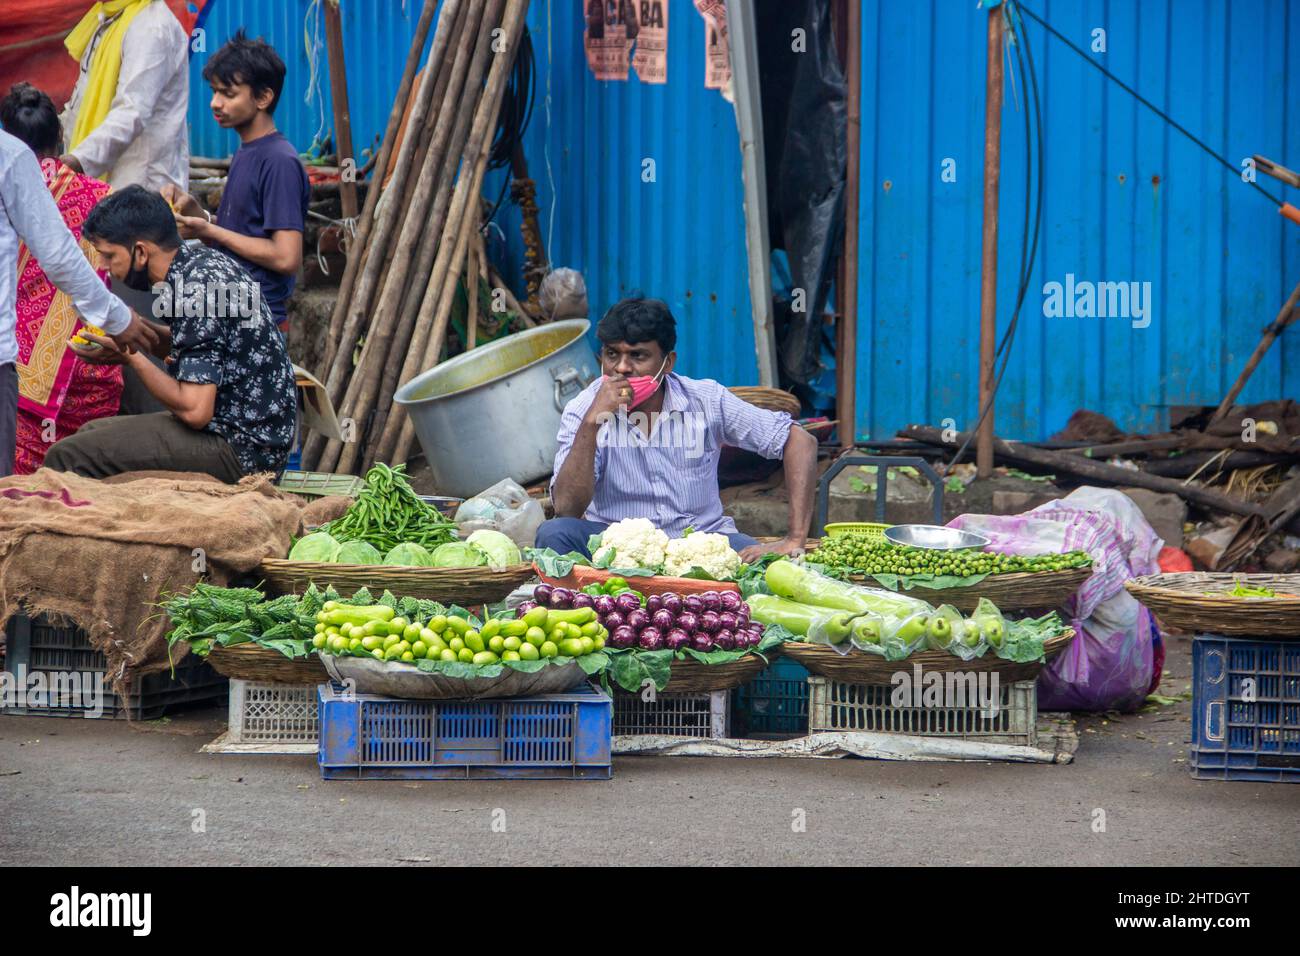 An outdoor market with consumers buying fruits and vegetables in India Stock Photo